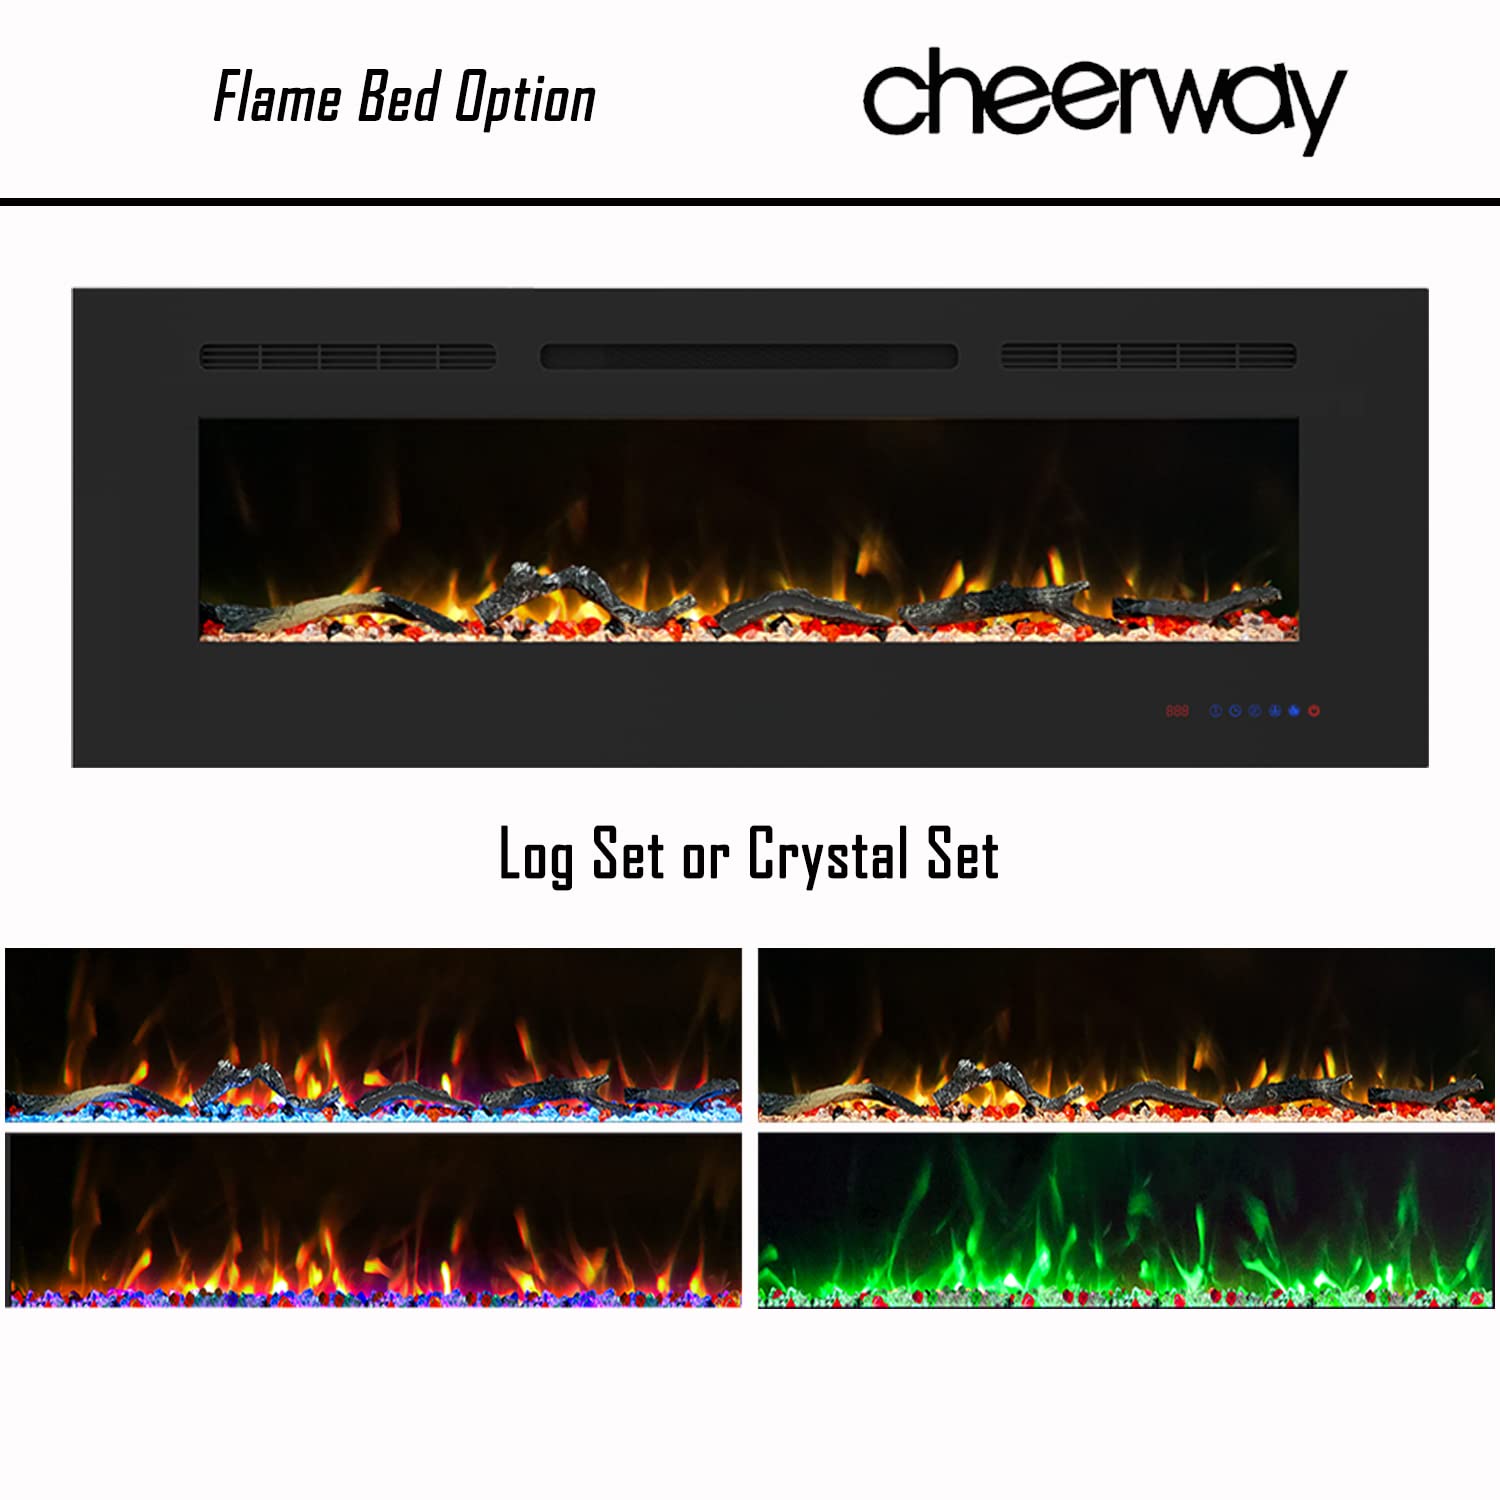 Cheerway 60 inch Electric Fireplace with Heater, Wall Mounted & Recessed Electric Fireplace Insert, Linear Wall Fireplace w/Ther